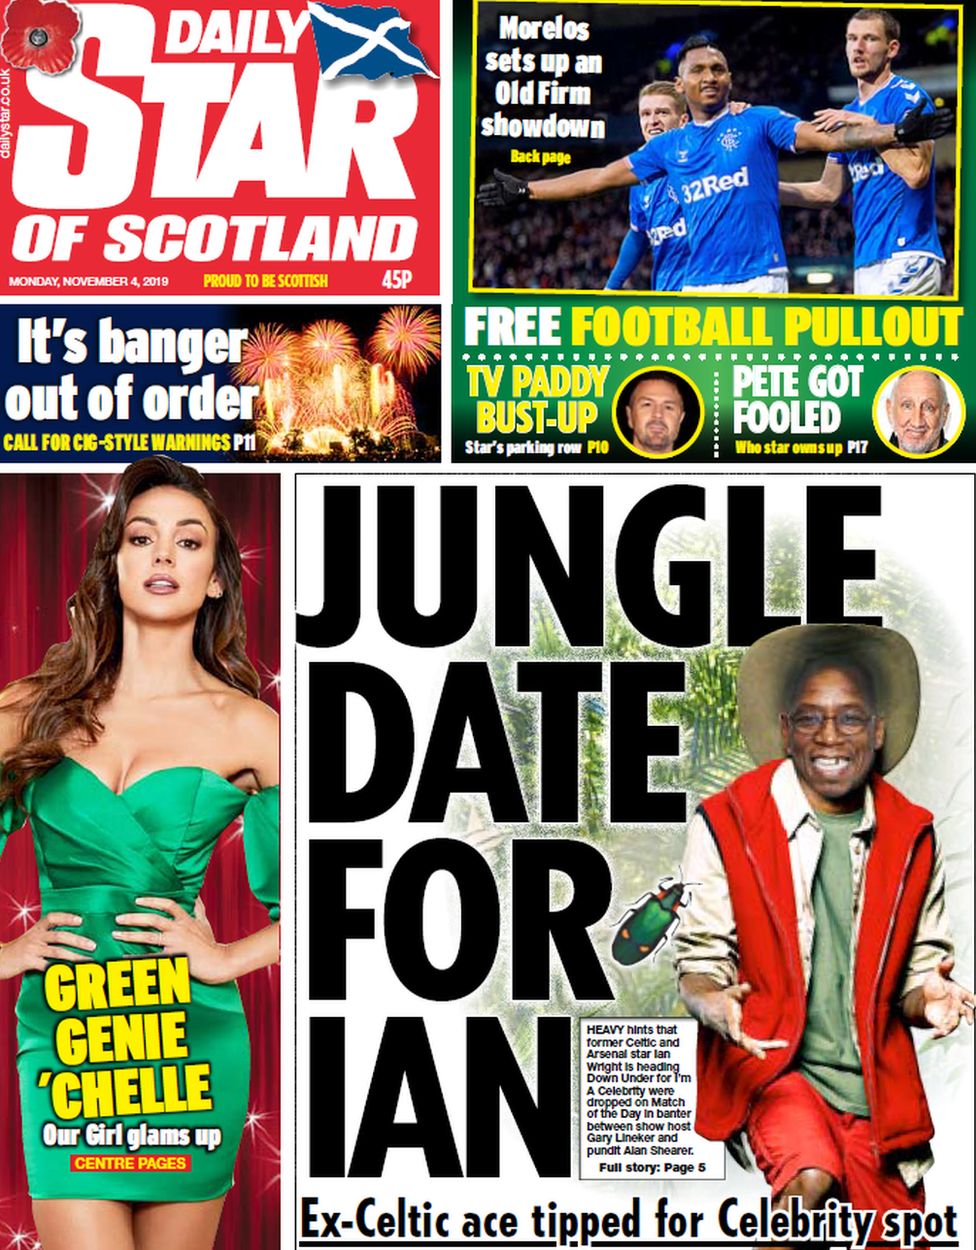 The Star of Scotland front page